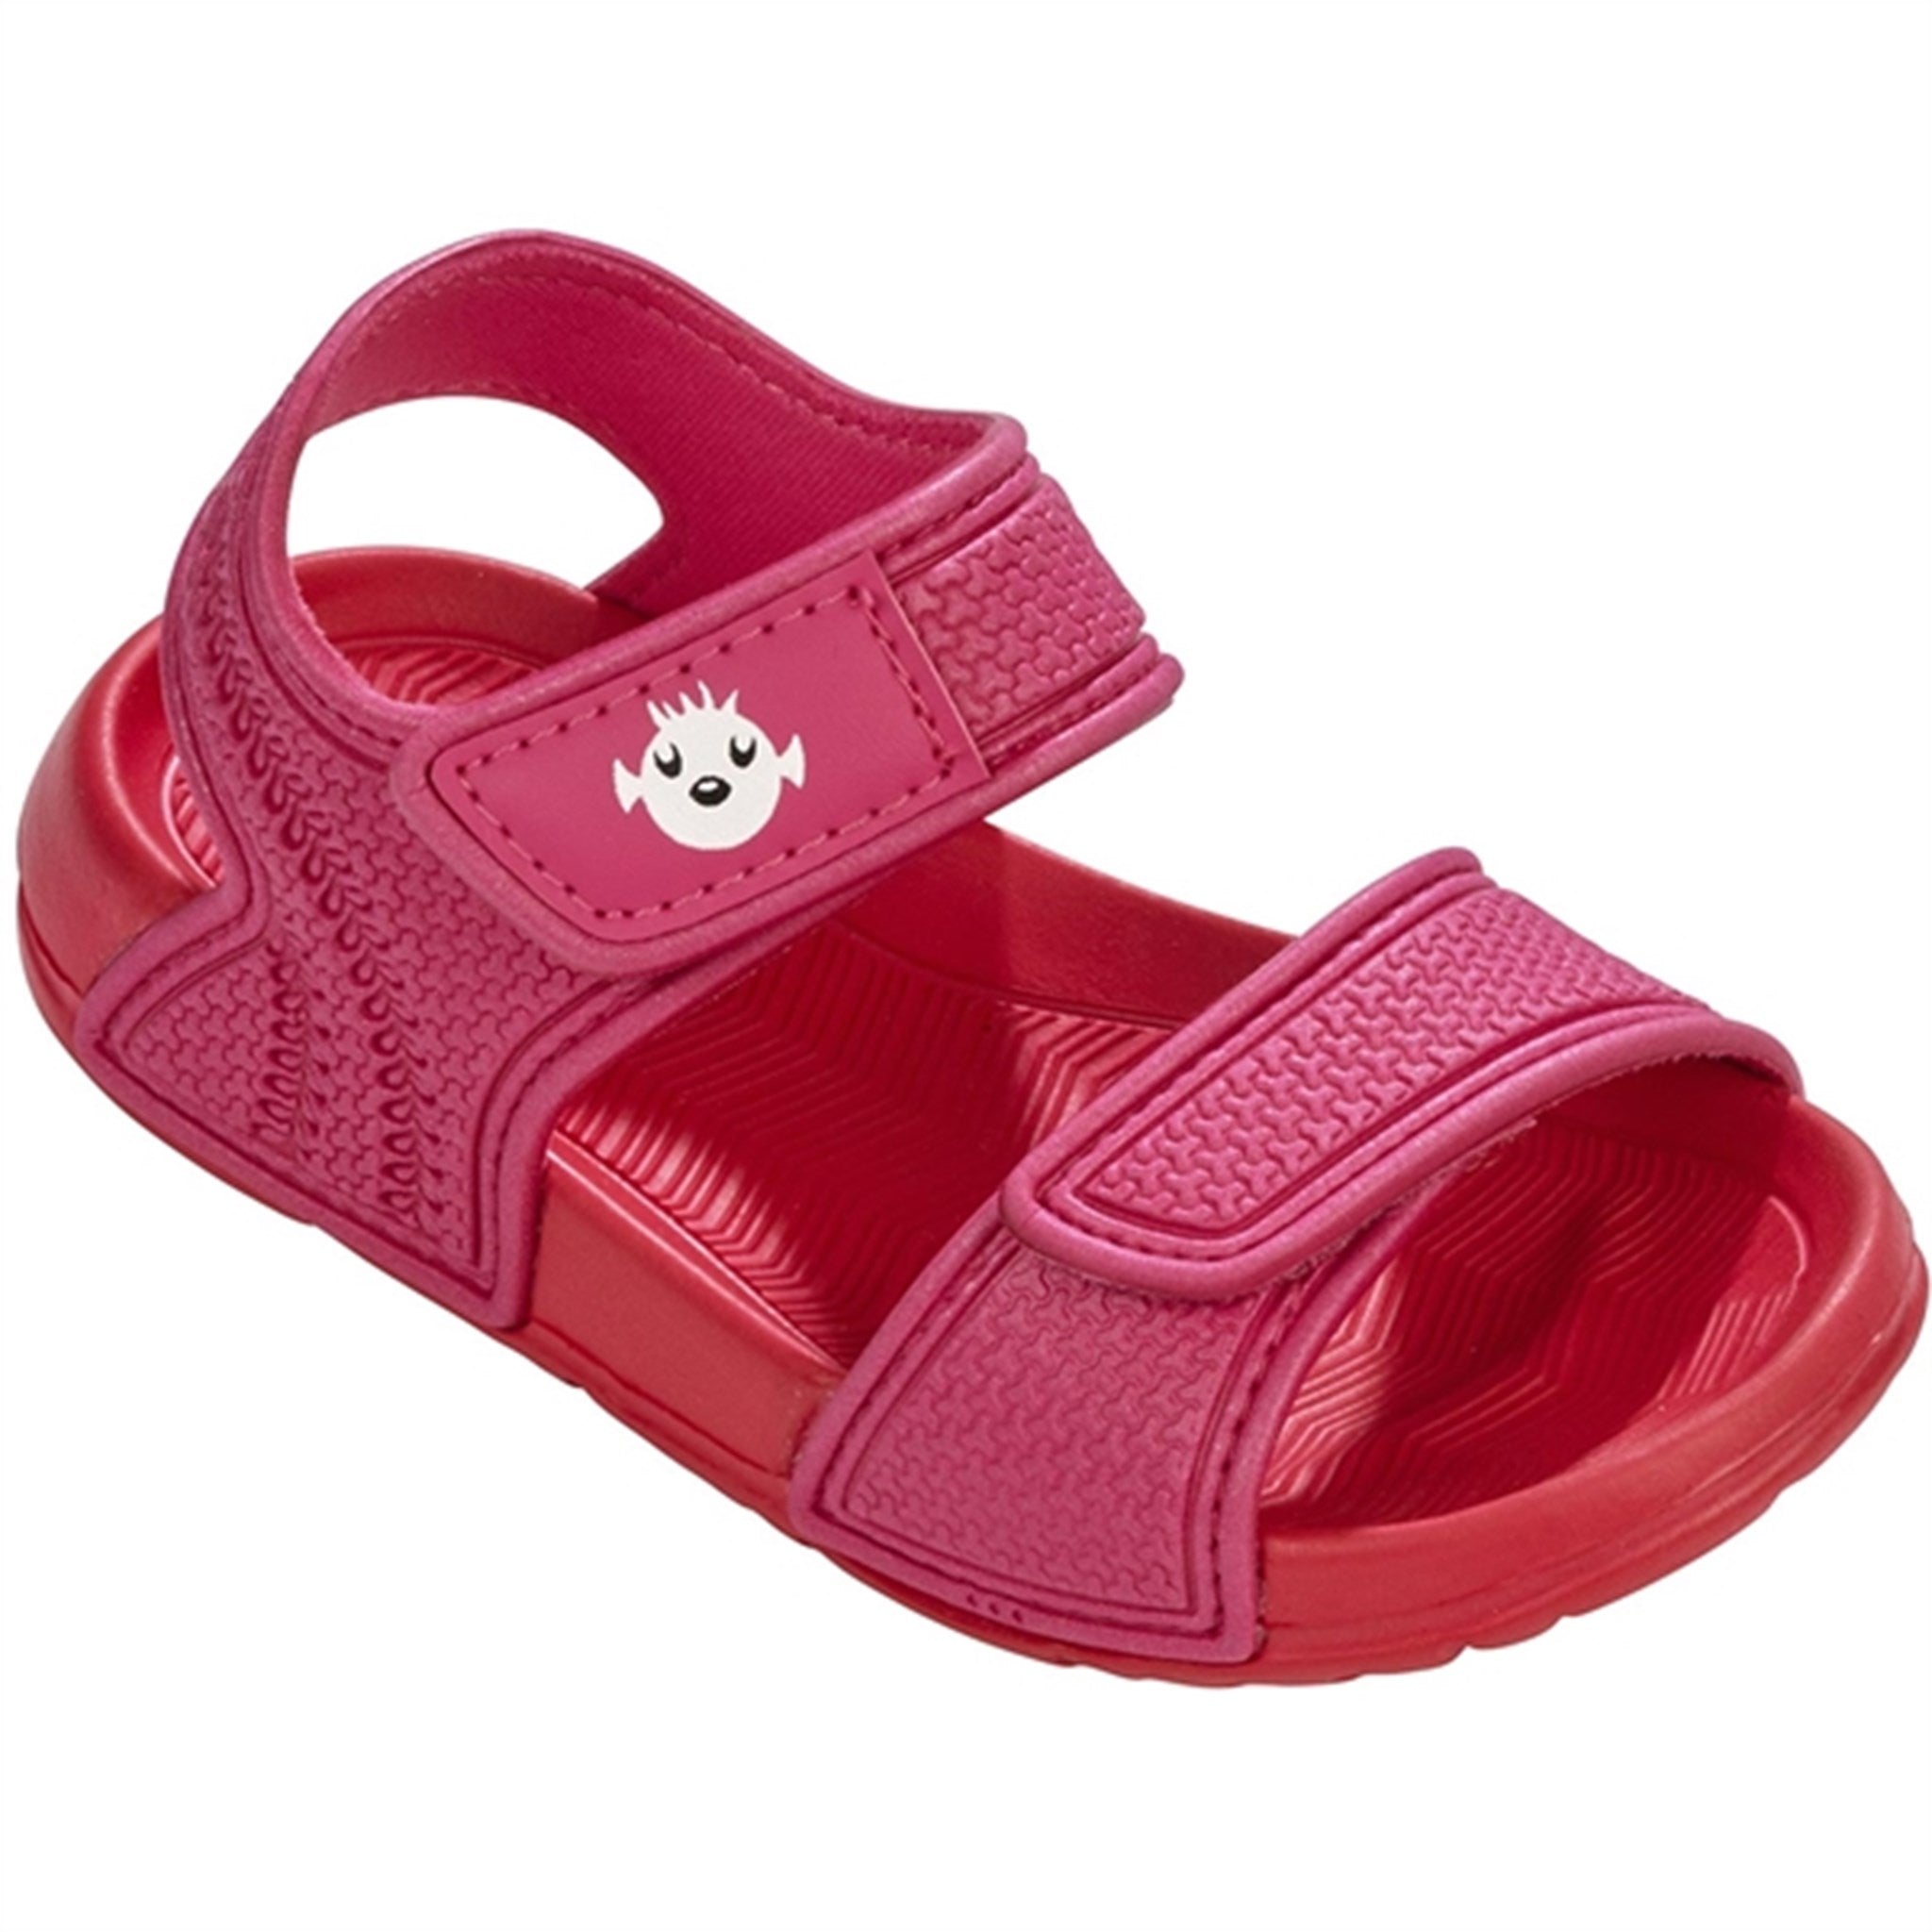 BECO Swim Shoes Pink